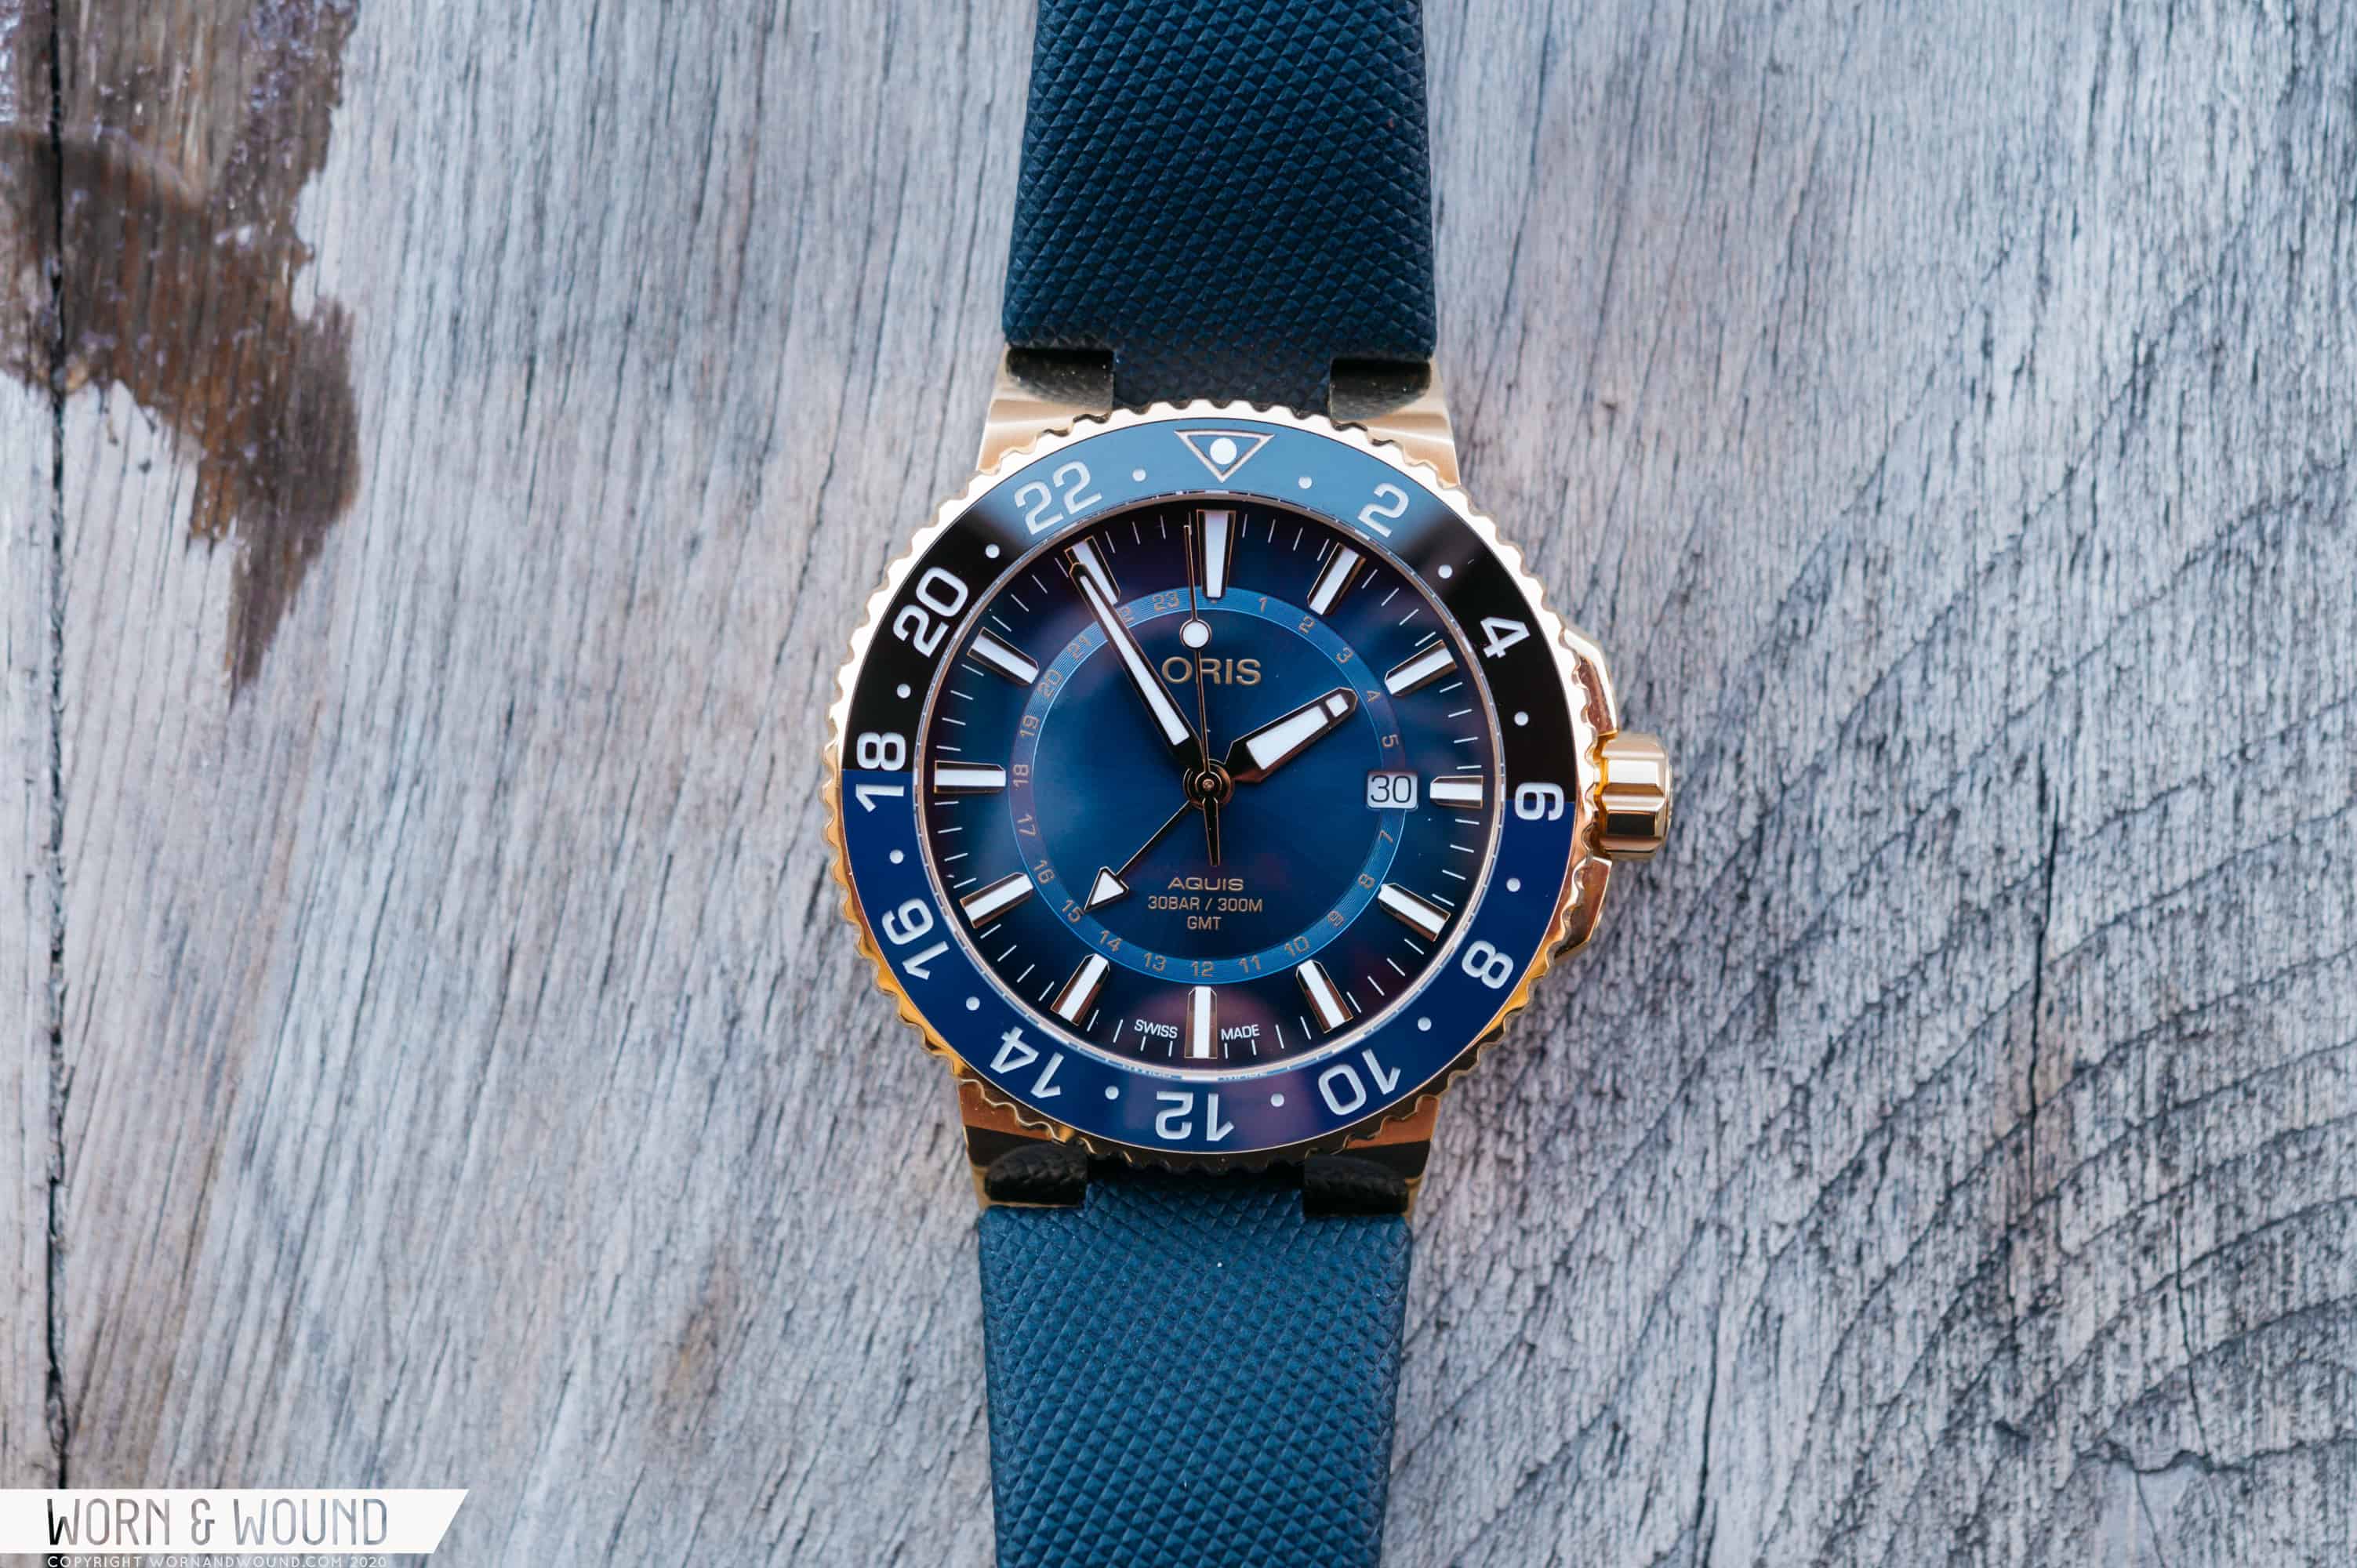 First Look at the Oris Aquis GMT Carysfort Reef Limited Edition